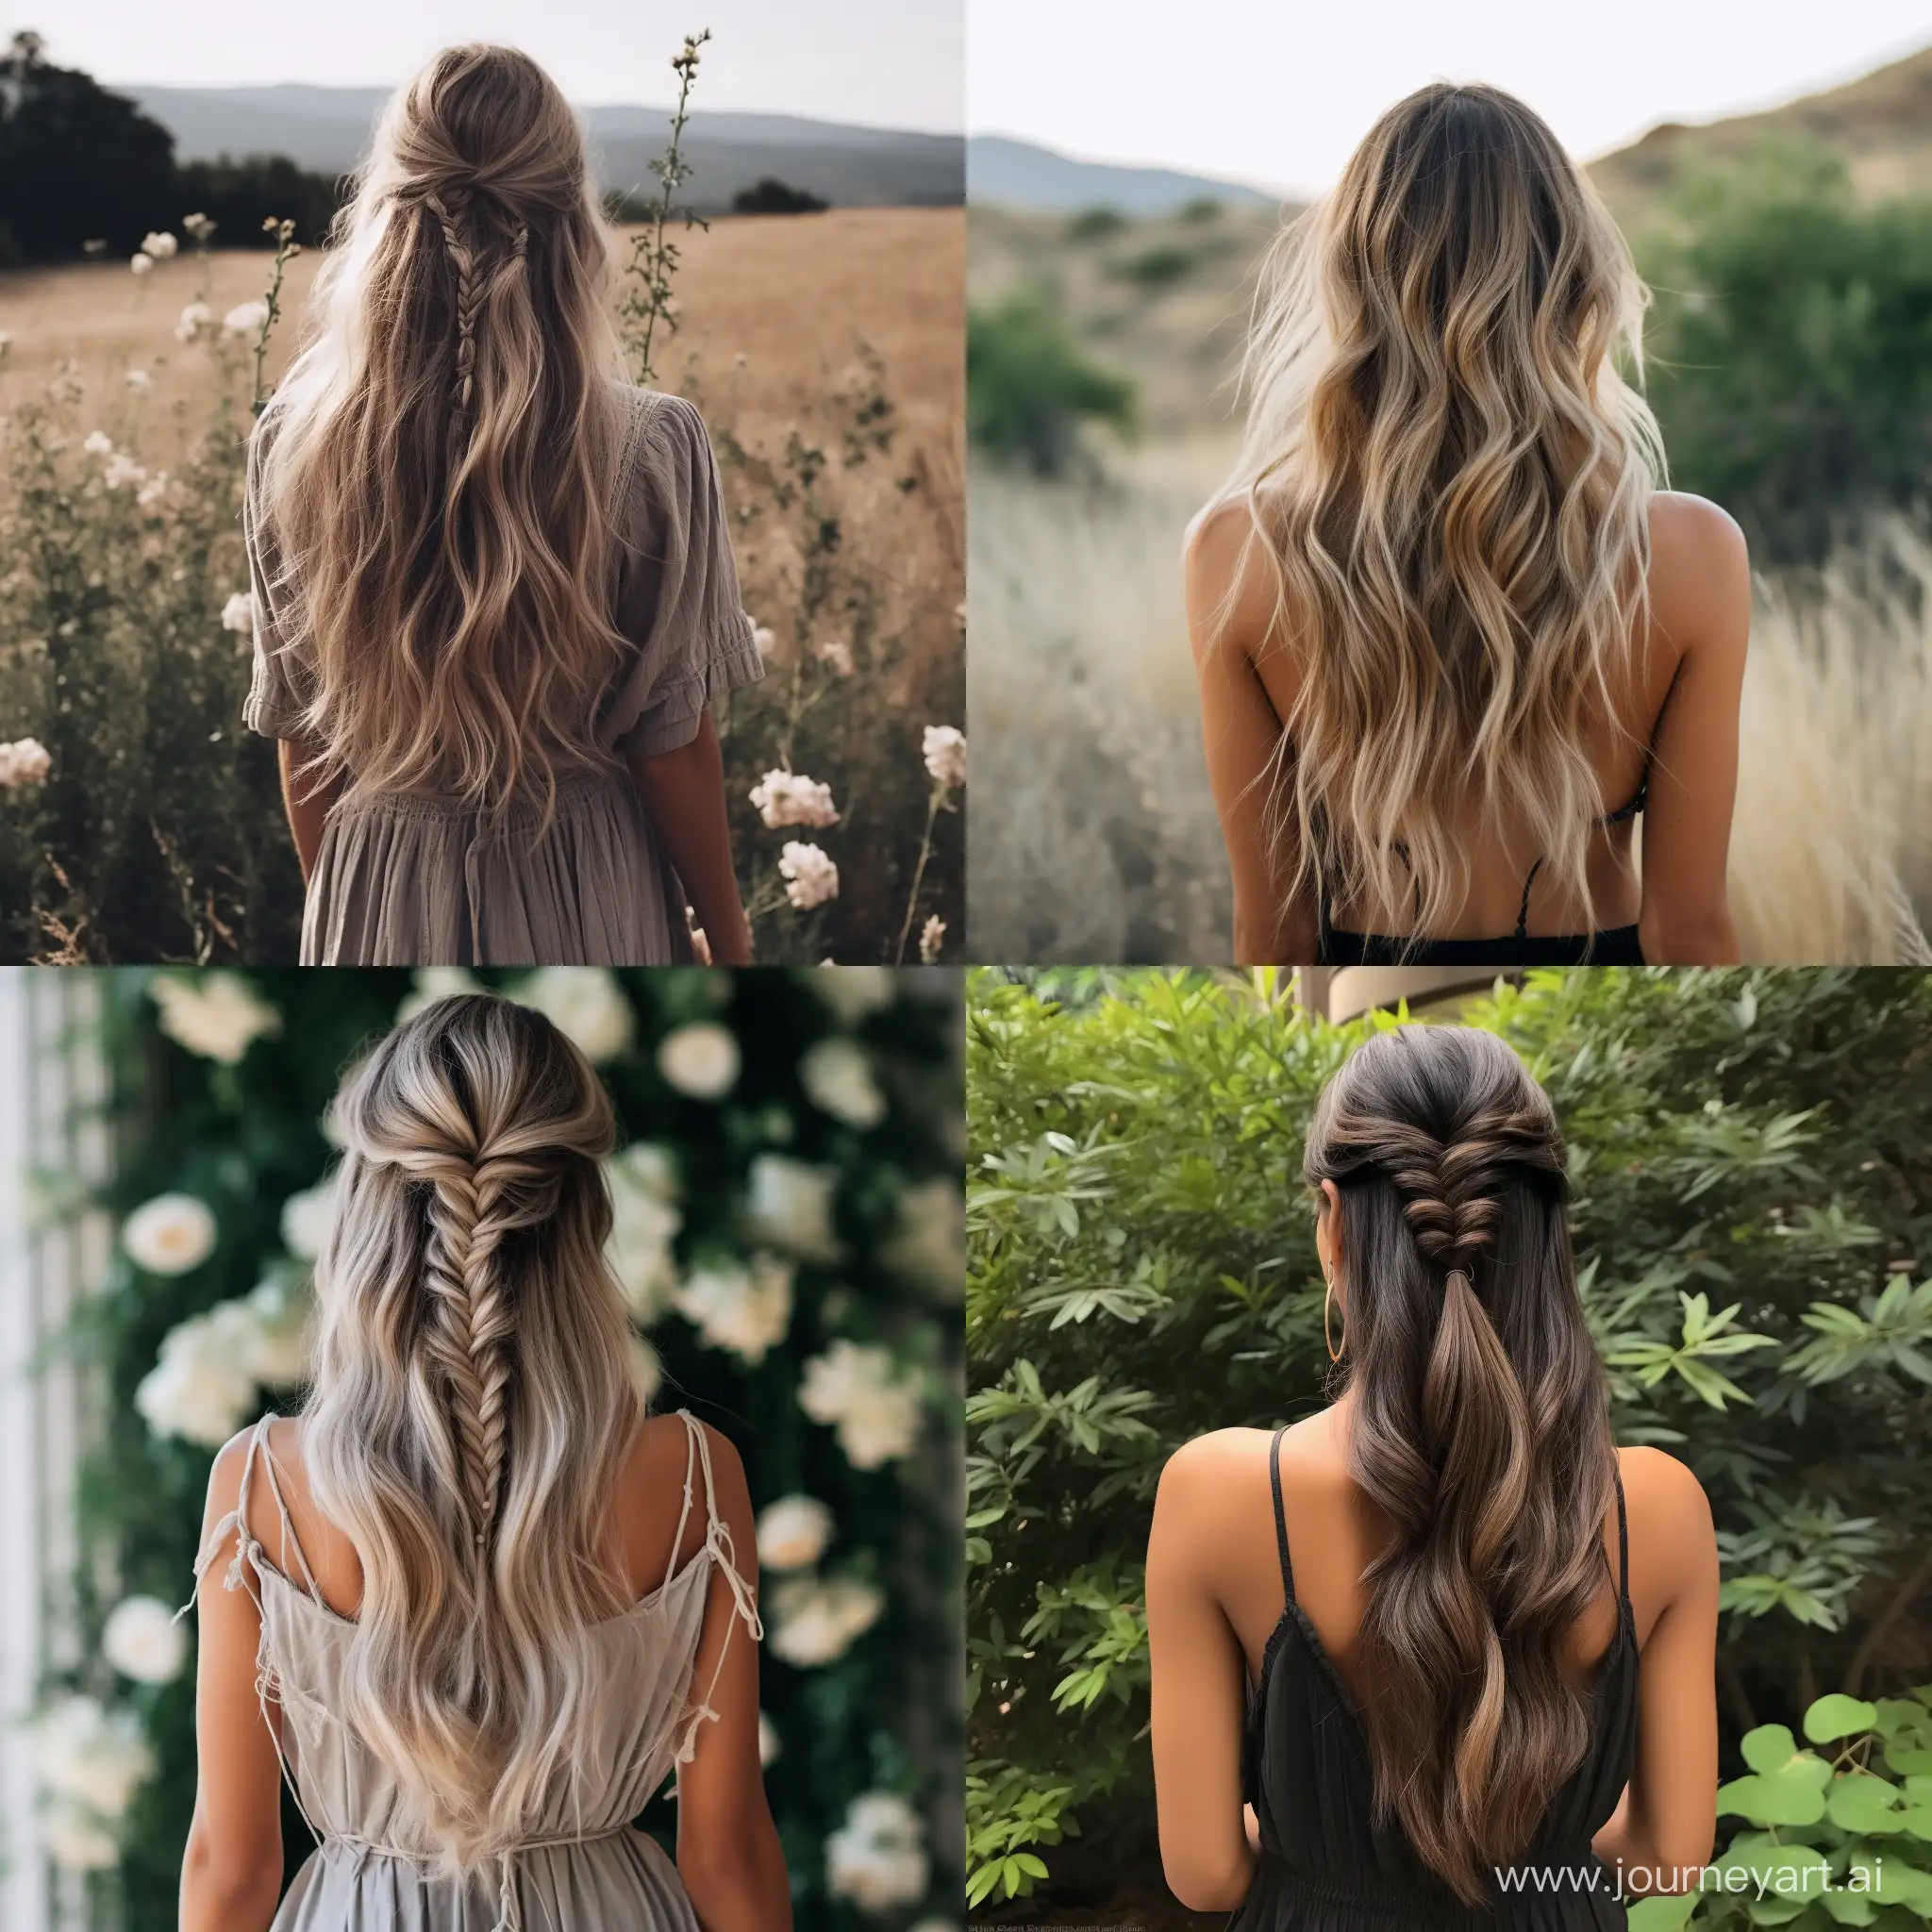 Image as in life women's hairstyle ideas for summer, back view